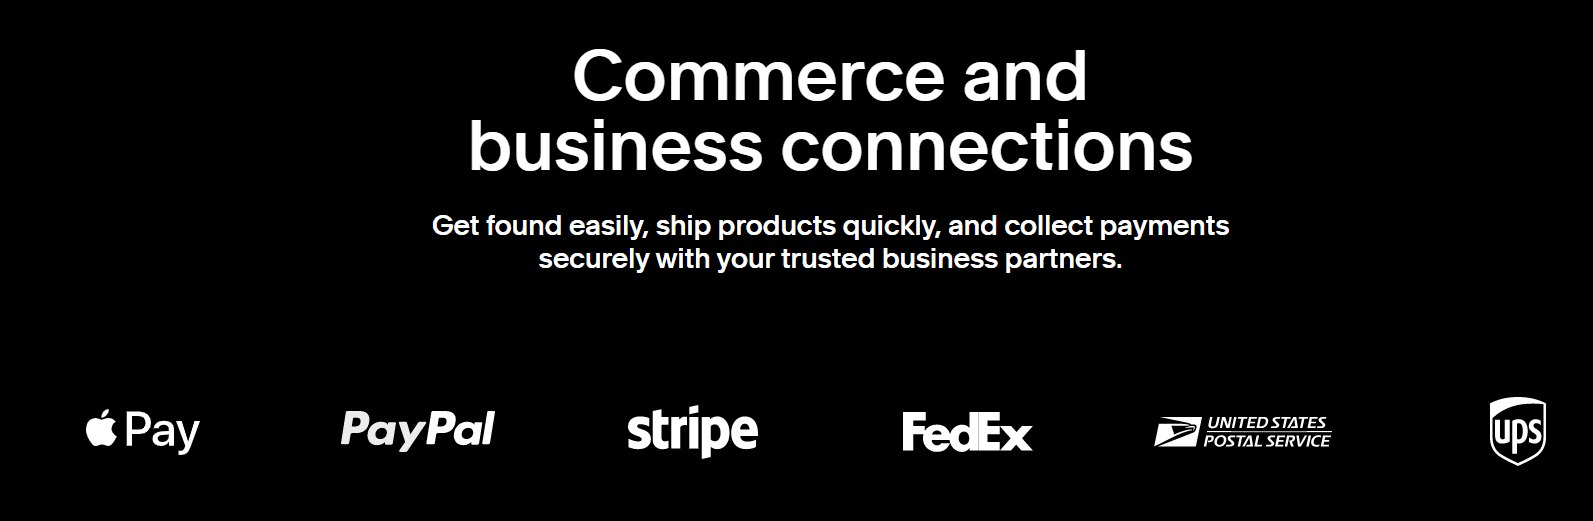 Business connections banner